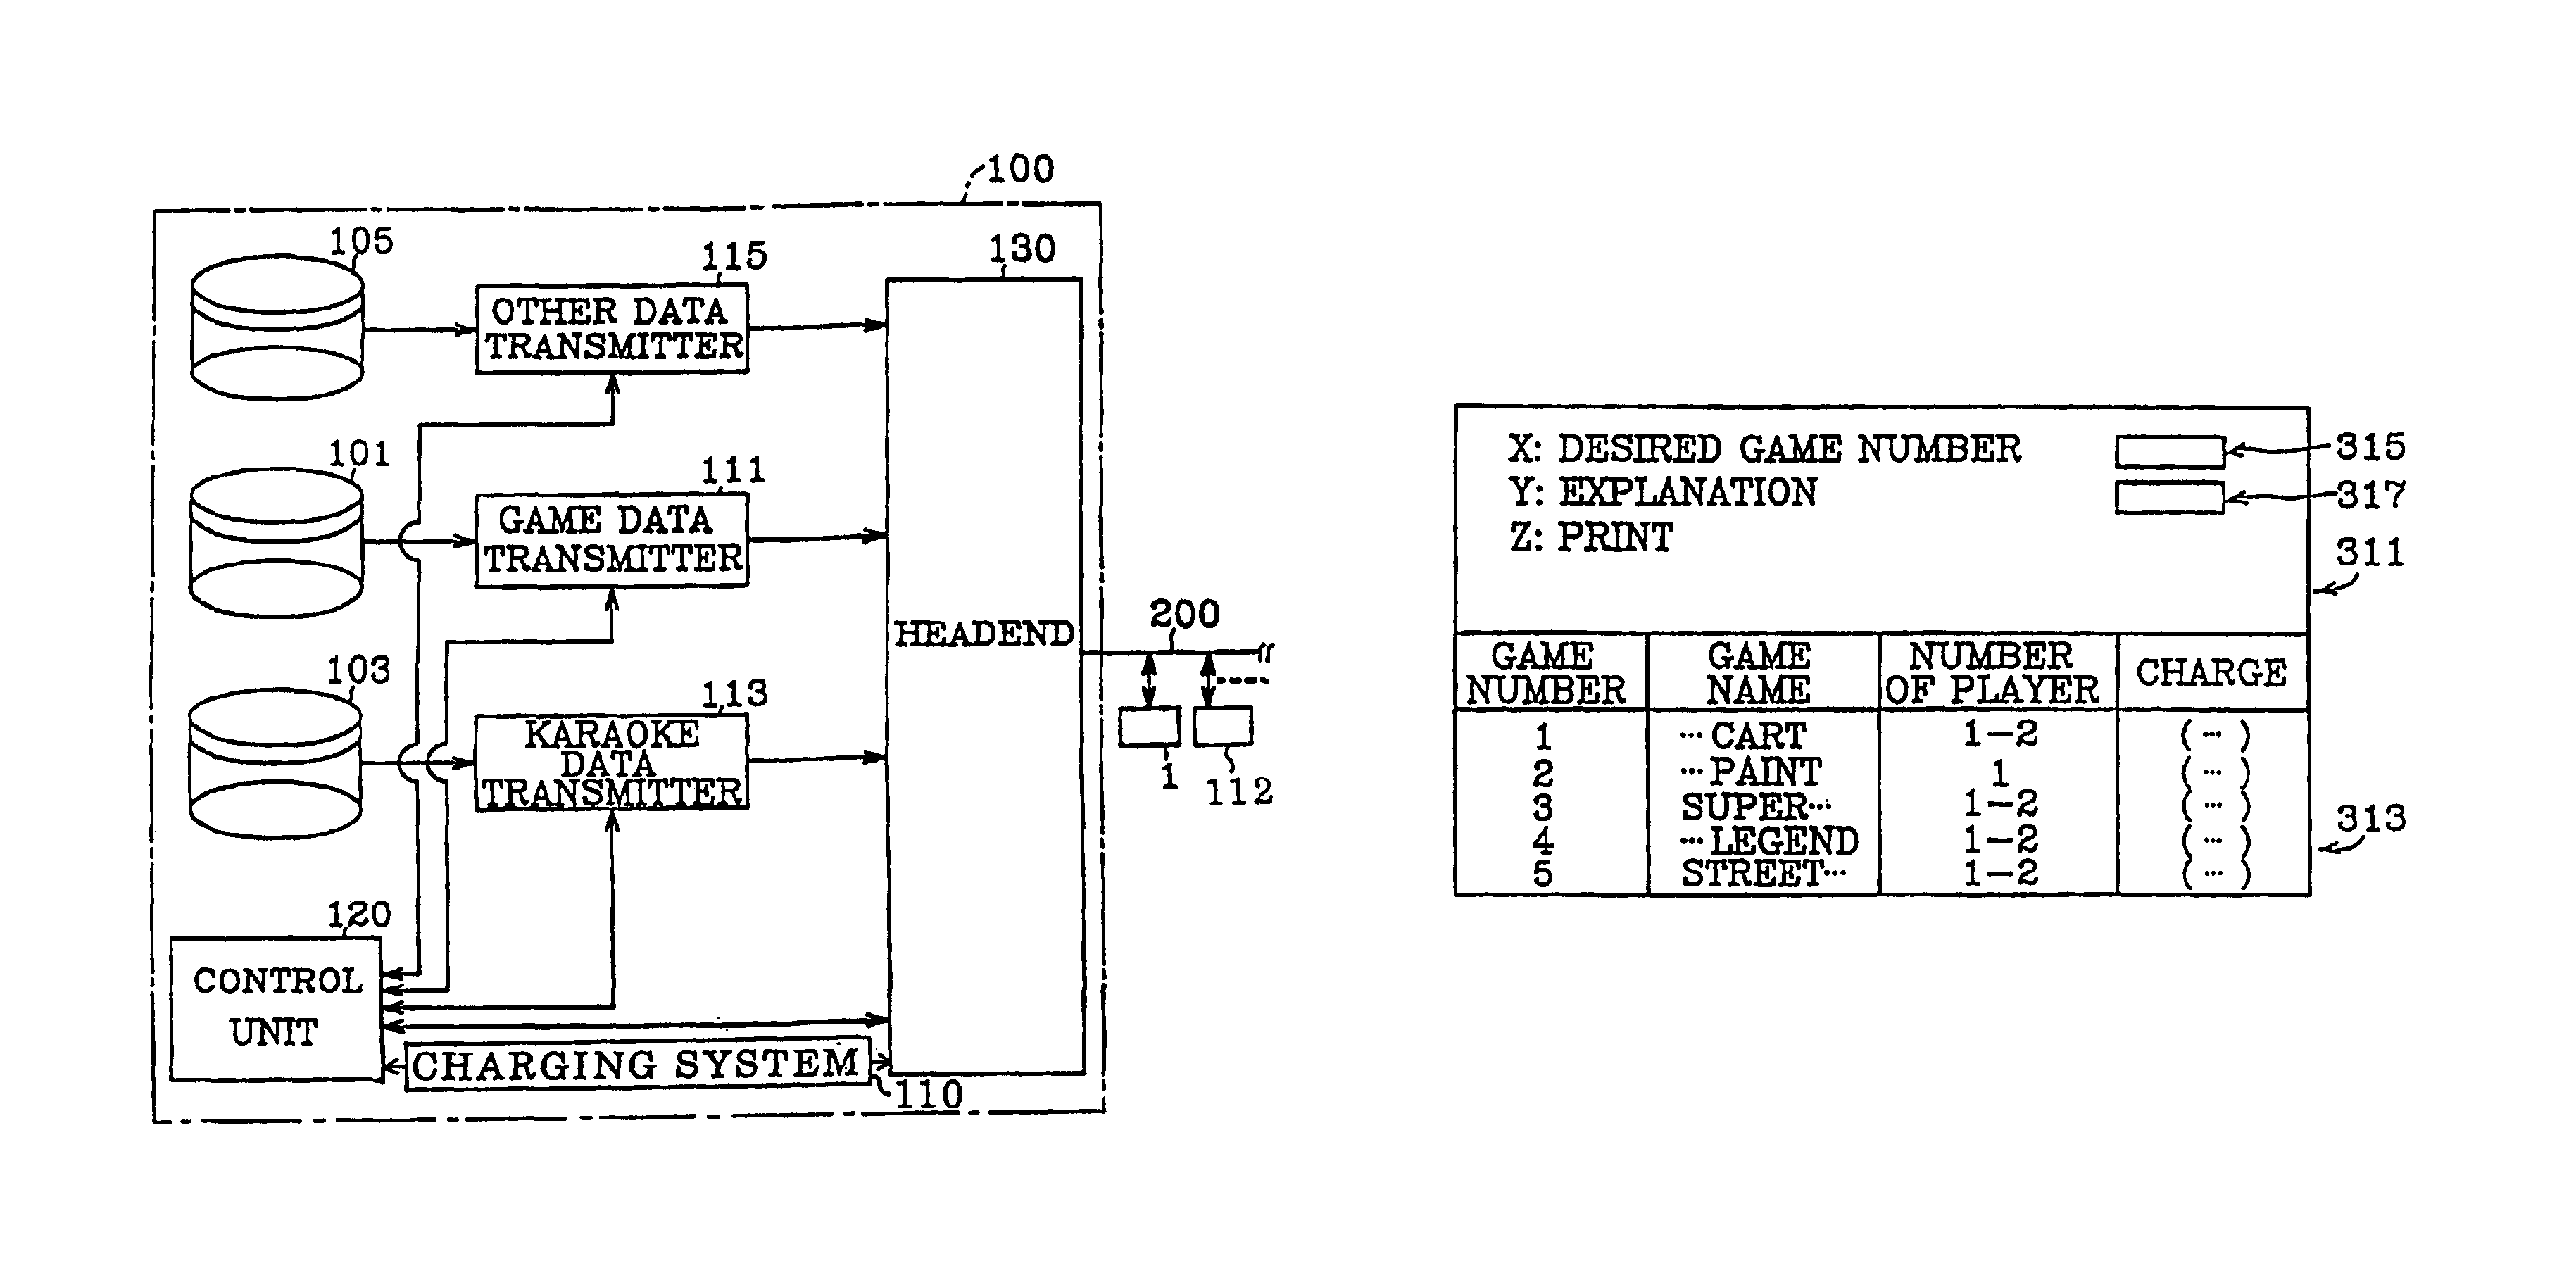 Interactive communication system for communicating video game and karaoke software